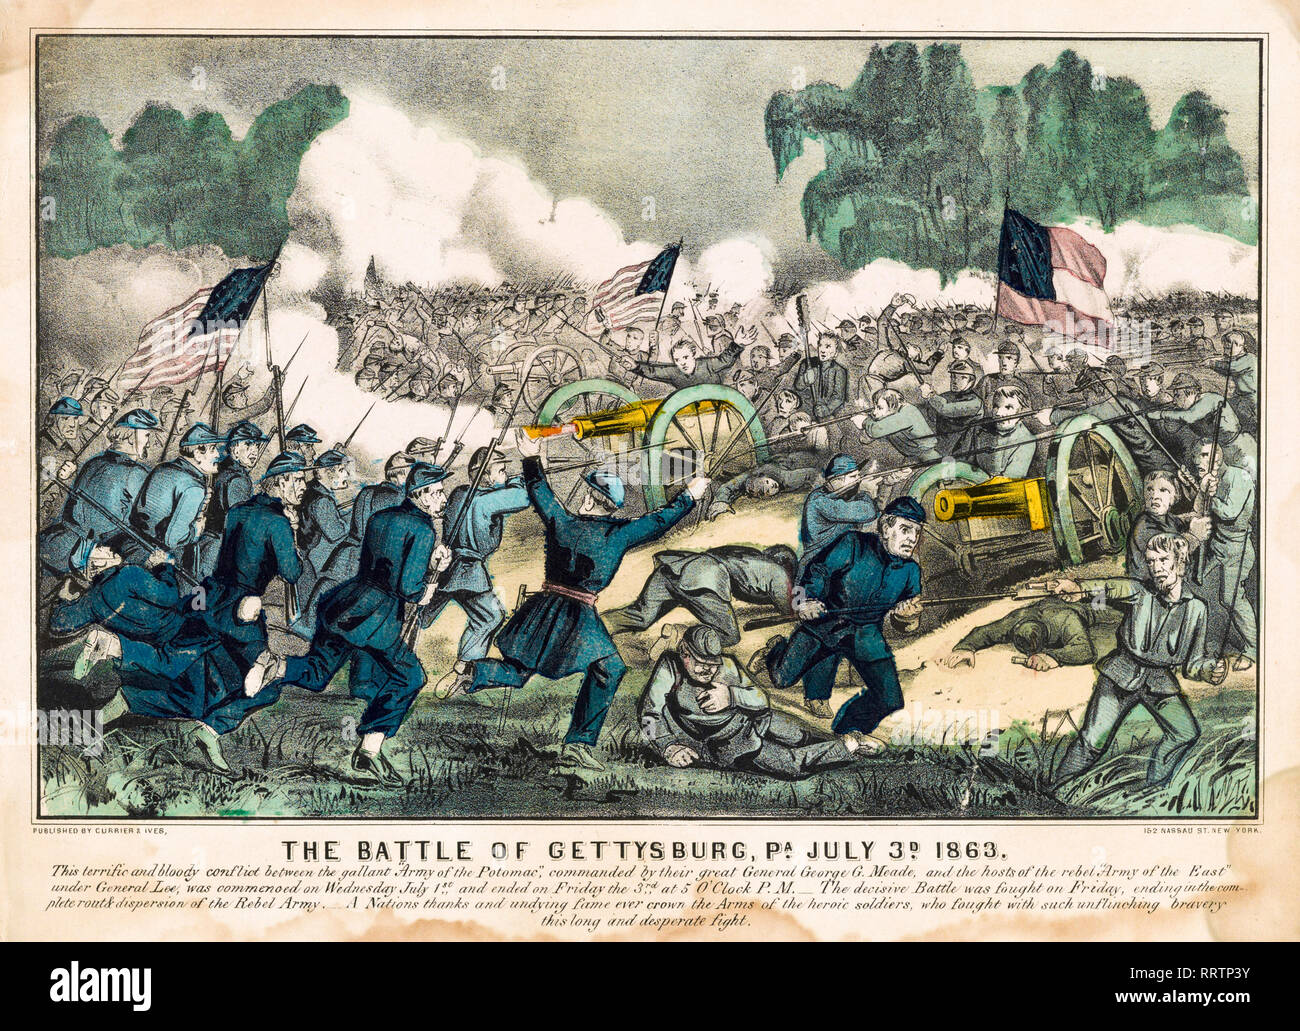 The Battle of Gettysburg, PA, July 3rd 1863, American Civil War lithograph, hand-coloured print by Currier & Ives, 1863 Stock Photo